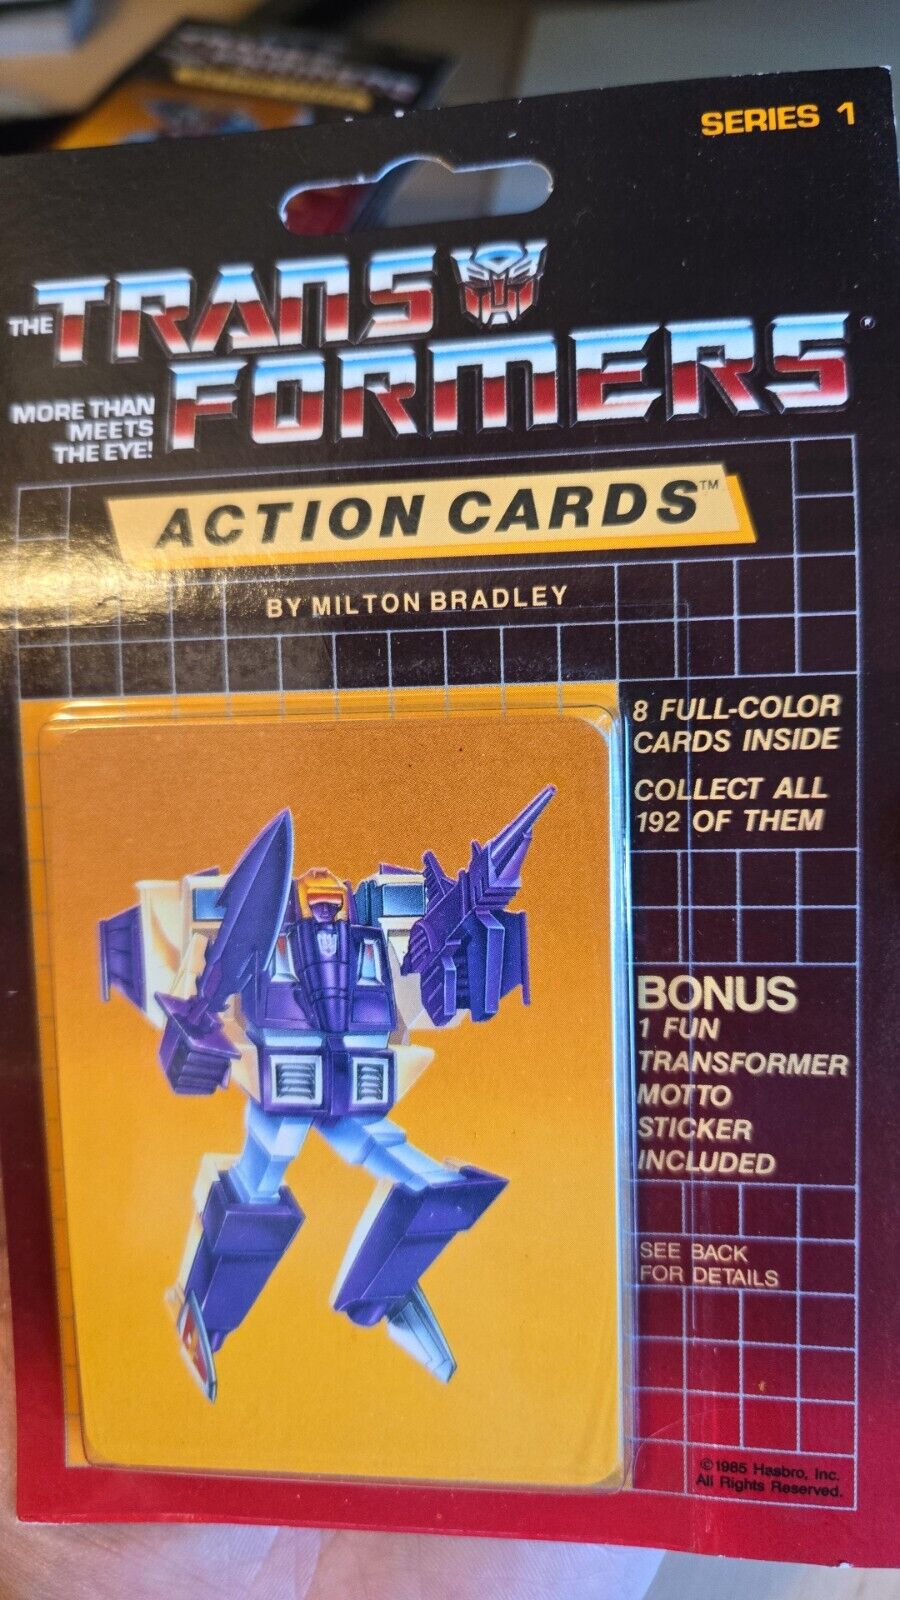 1985 Hasbro Transformers Action Cards Sealed Pack - Blitzwing on top